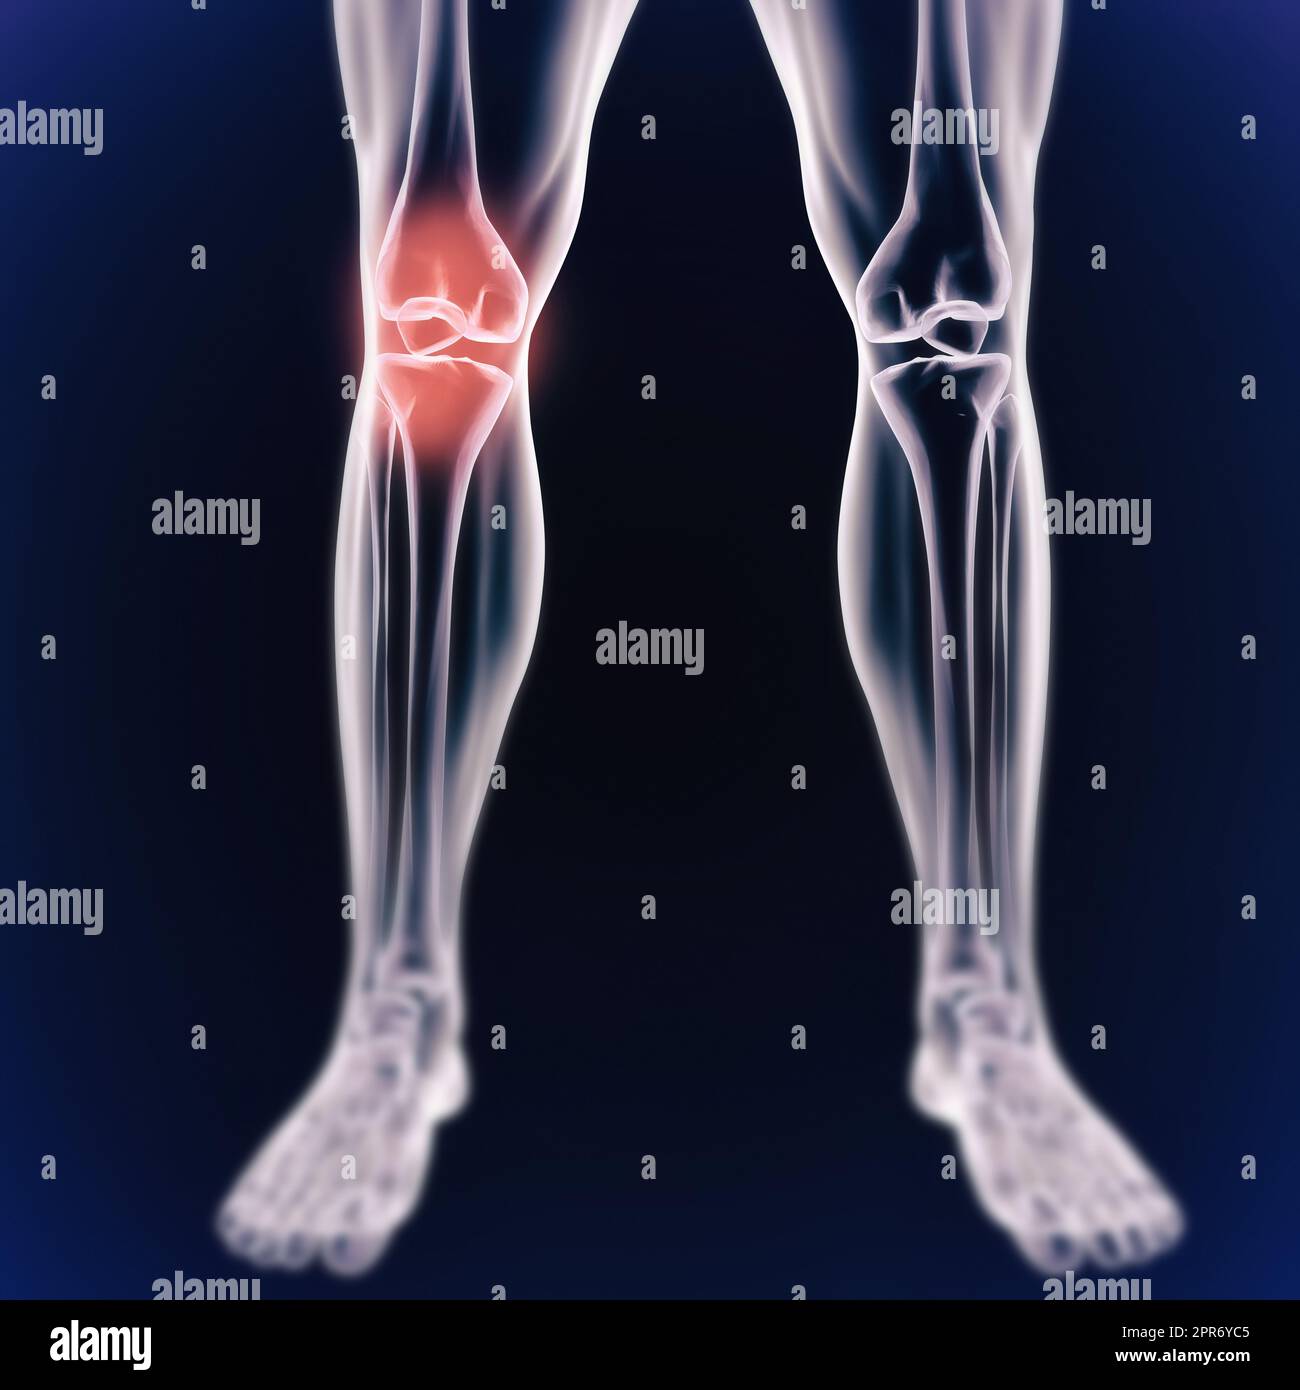 Knee and joint pains. When inflammation strikes. Illustration of the human body indicating the skeletal structure. Stock Photo